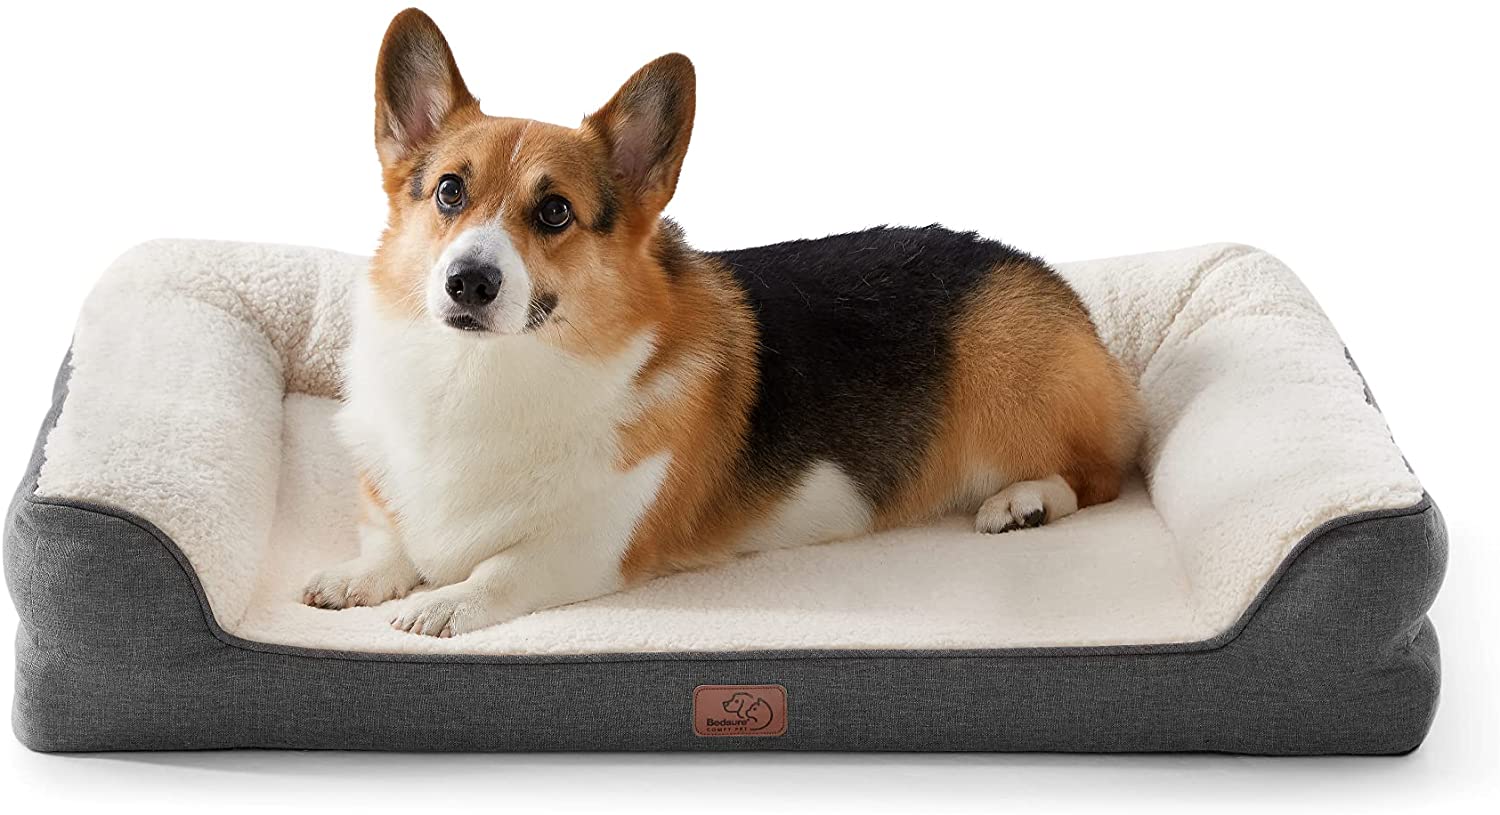 Bedsure announces Sleep Solutions for Pet Health and Wellness